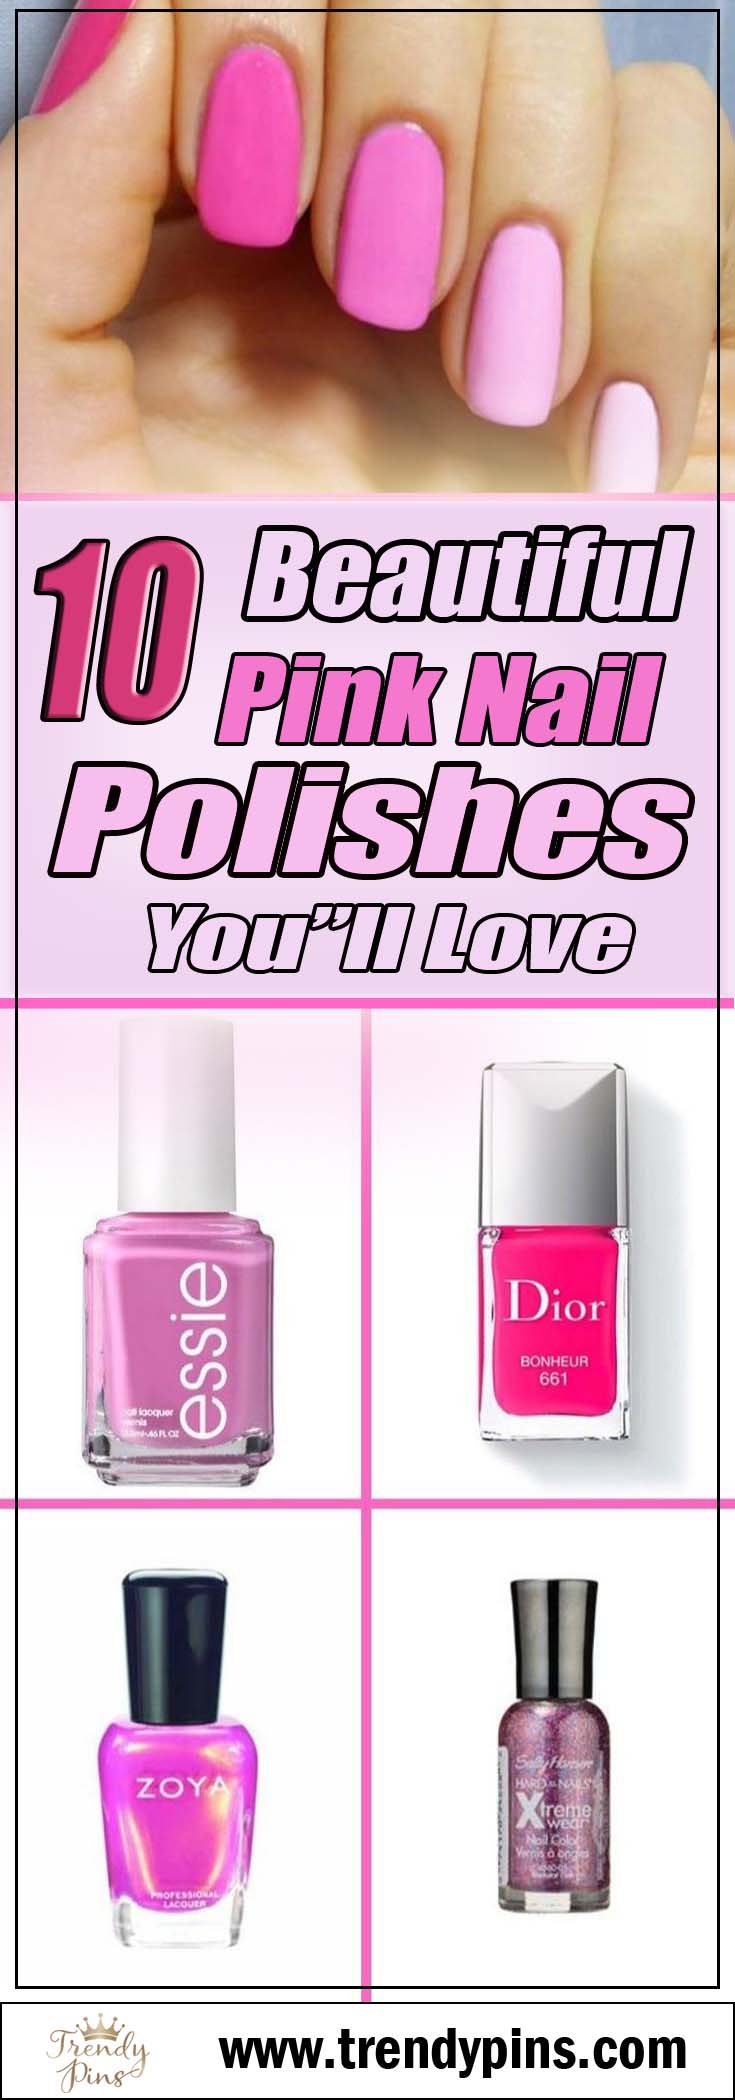 10 Beautiful Pink Nail Polishes You'll Love #nails #polishes # beauty #trendypins 